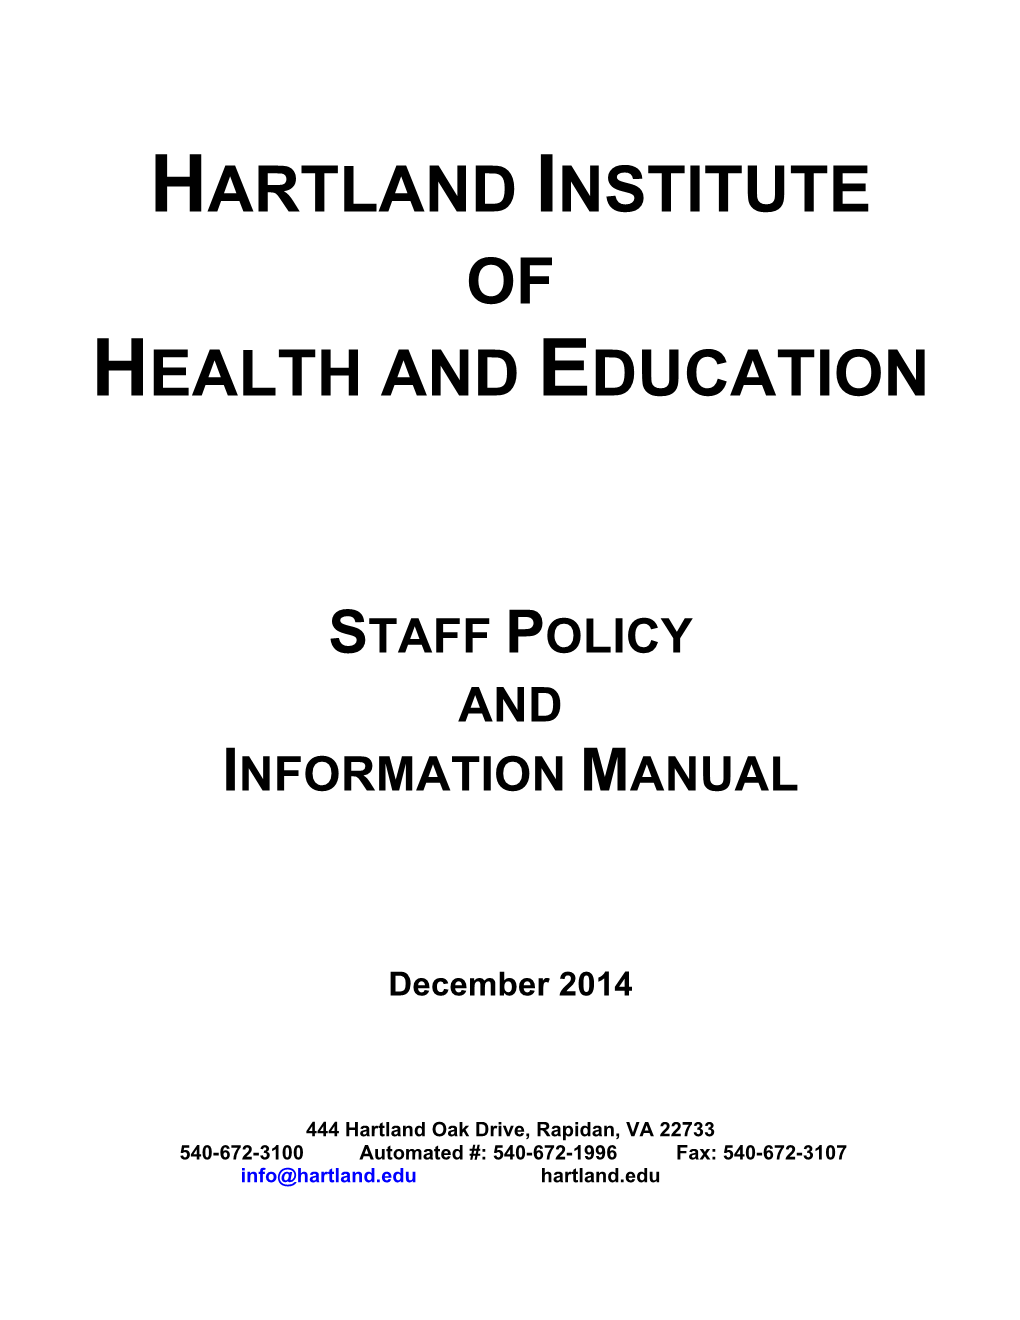 Hartland Institute of Health and Education